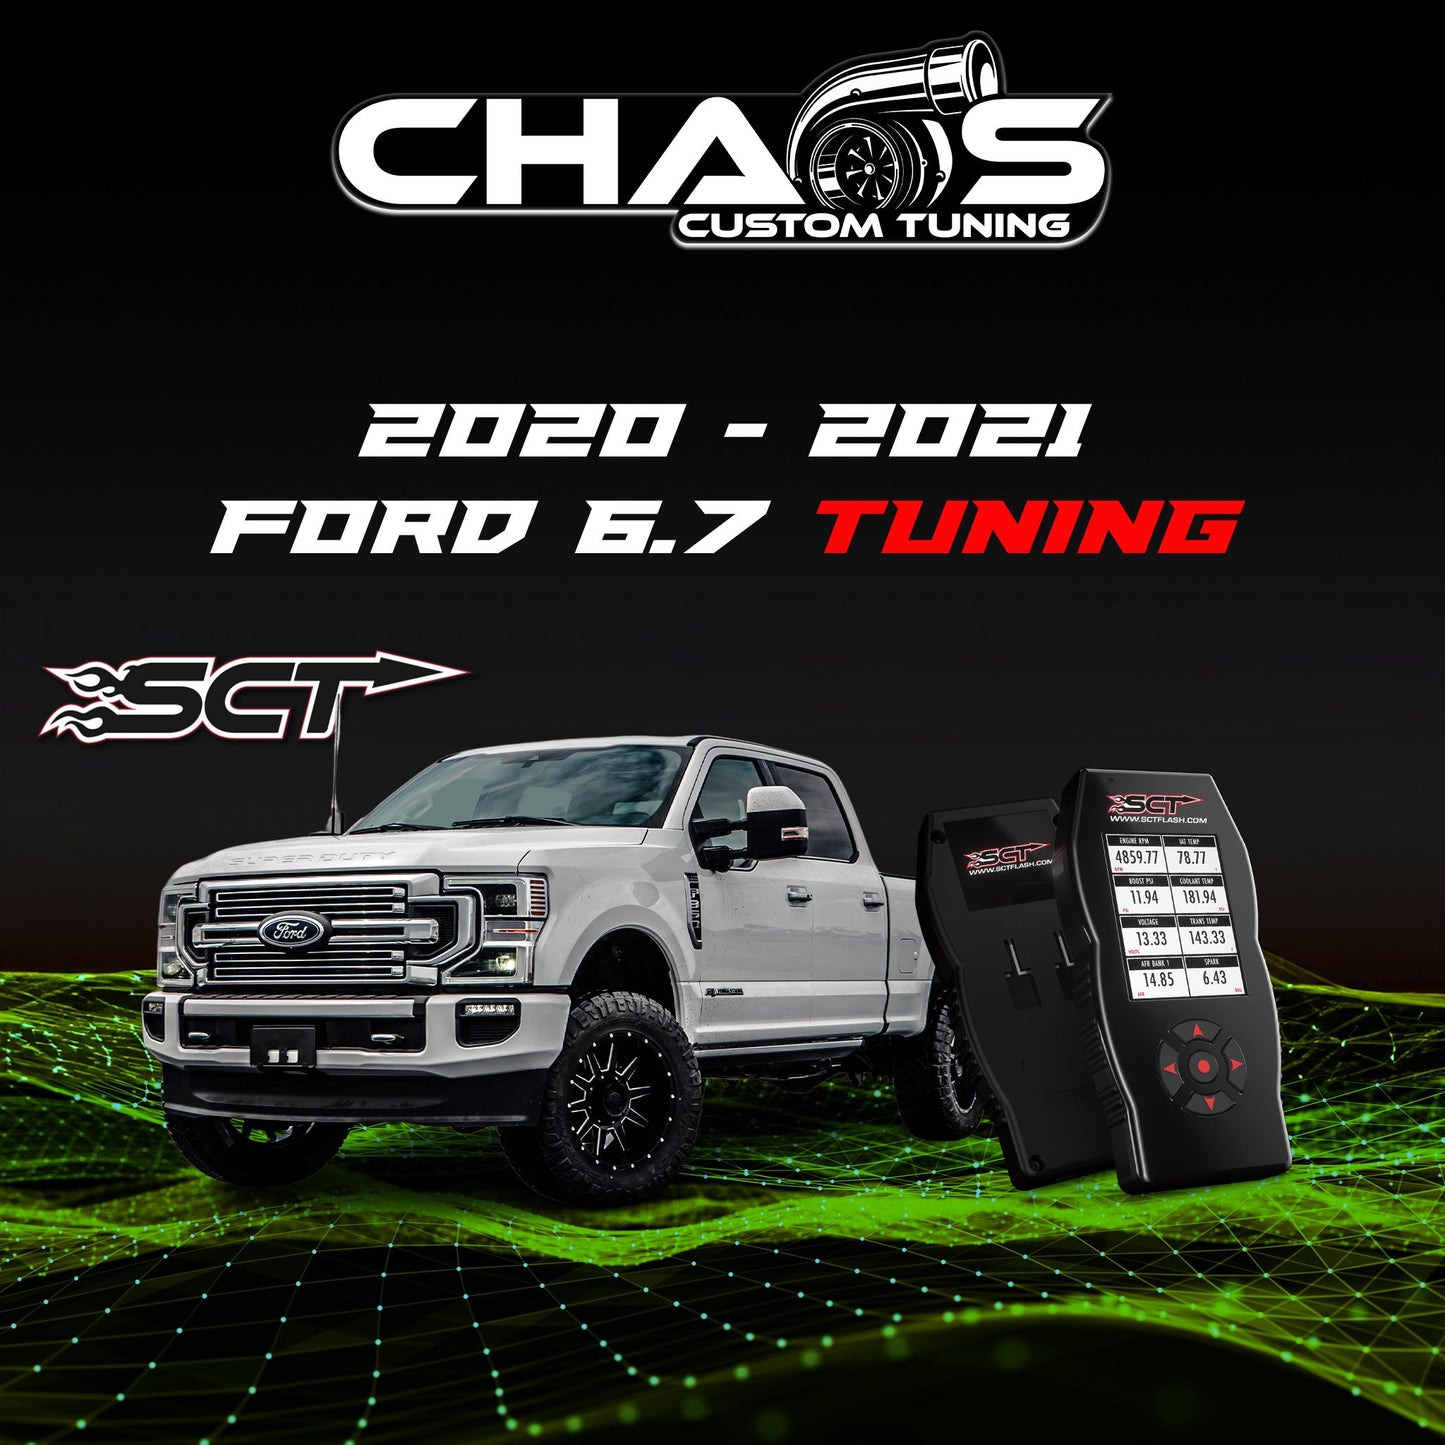 SCT X4 with CCT Tune Files (2020-2021 Powerstroke 6.7L) Tune Files Chaos Custom Tuning 